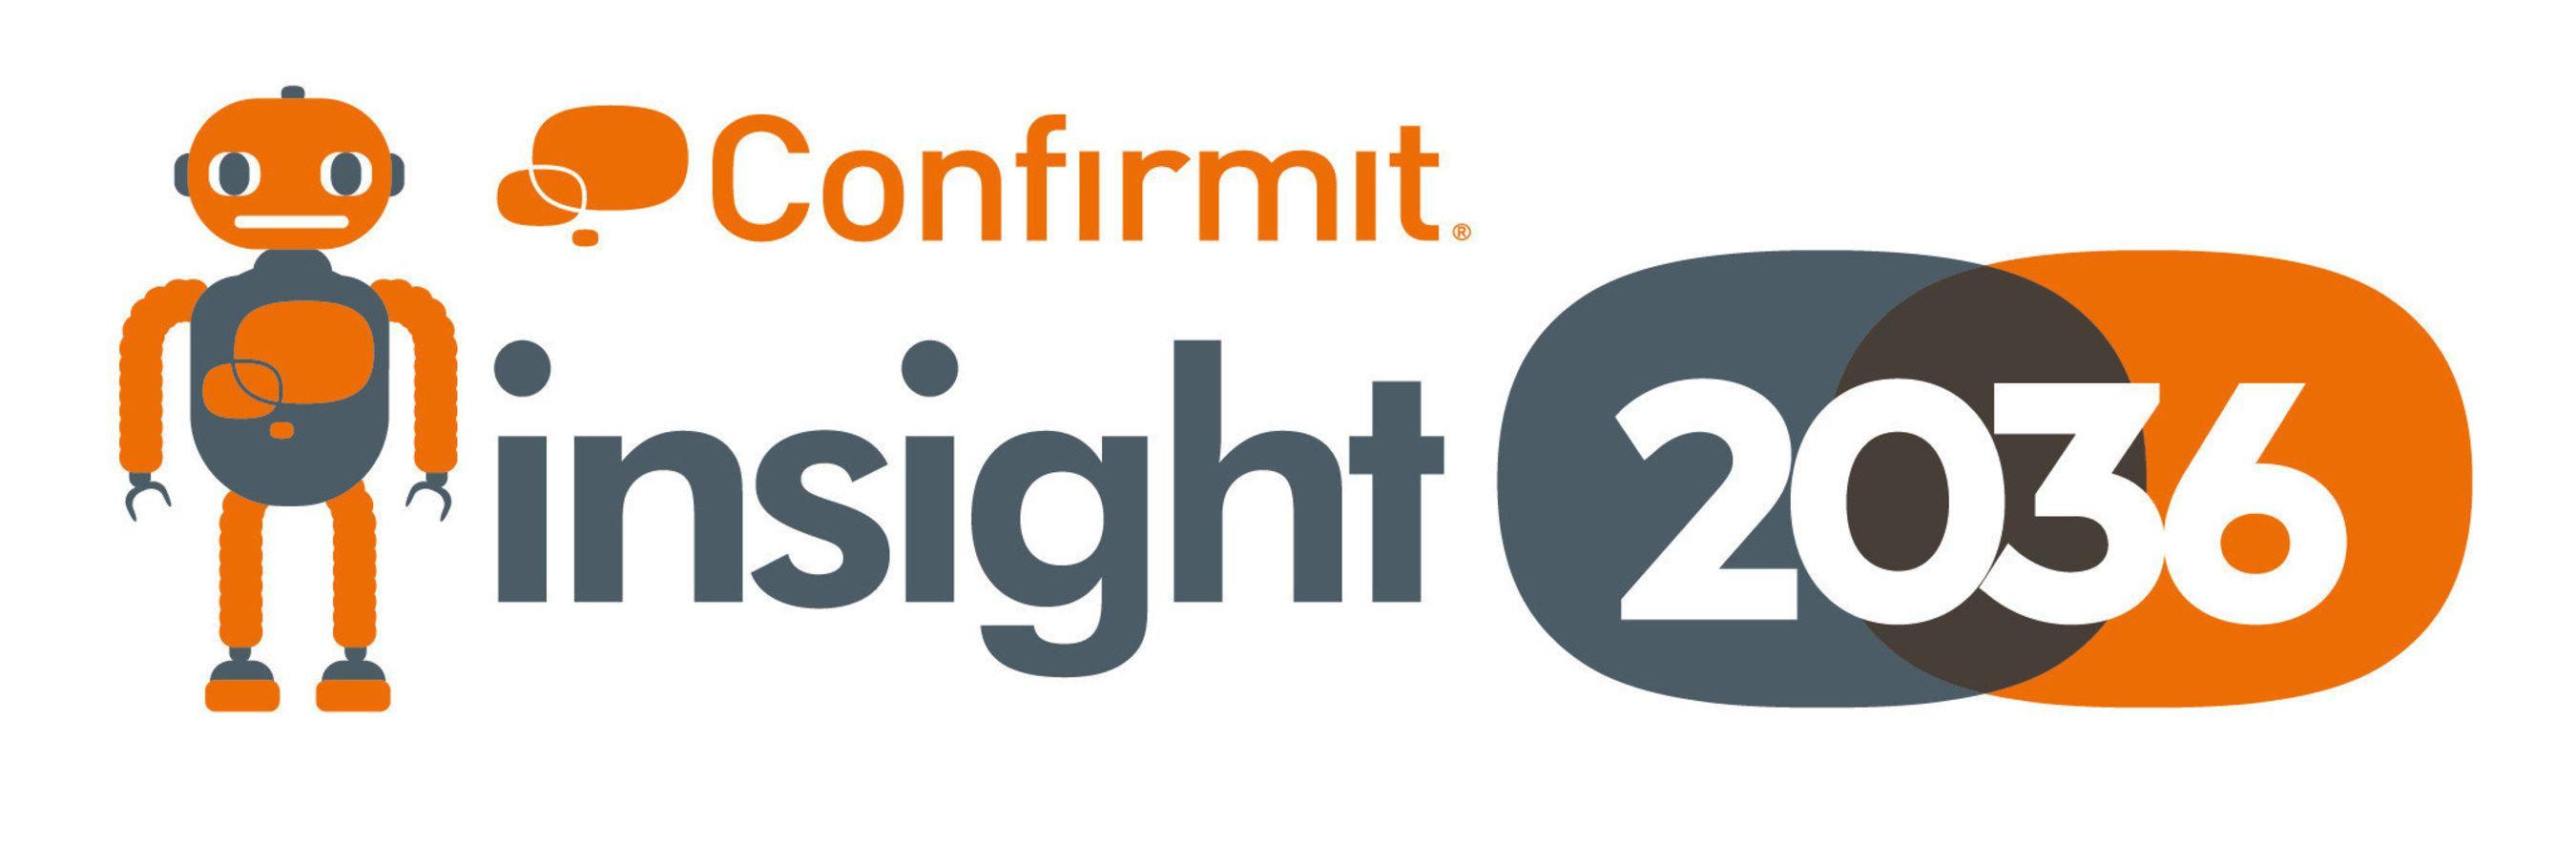 Confirmit Logo - Confirmit sets its sights on the future with Insight 2036 survey